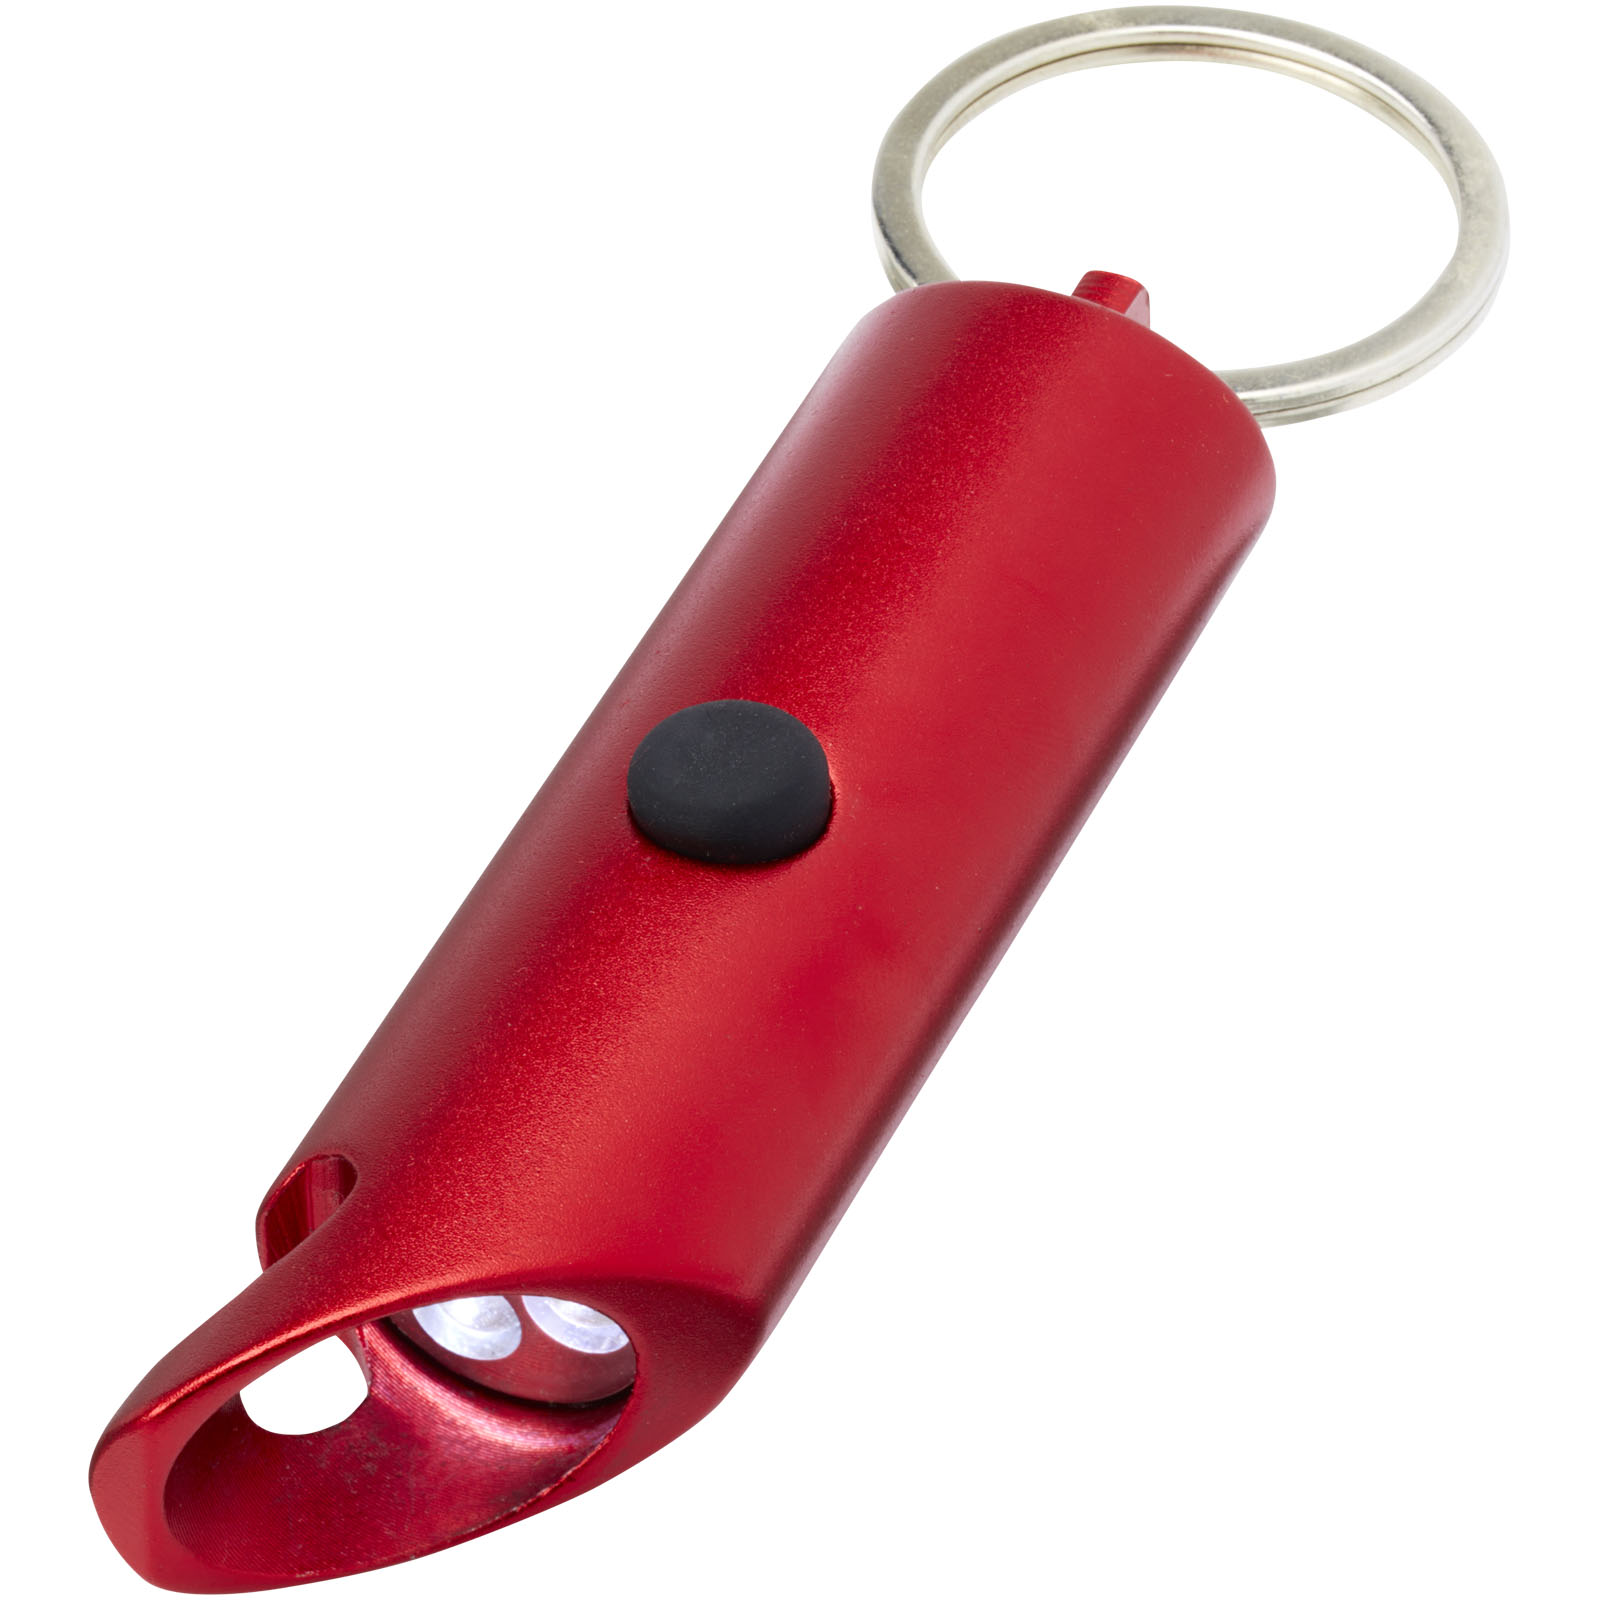 Tools & Car Accessories - Flare RCS recycled aluminium IPX LED light and bottle opener with keychain